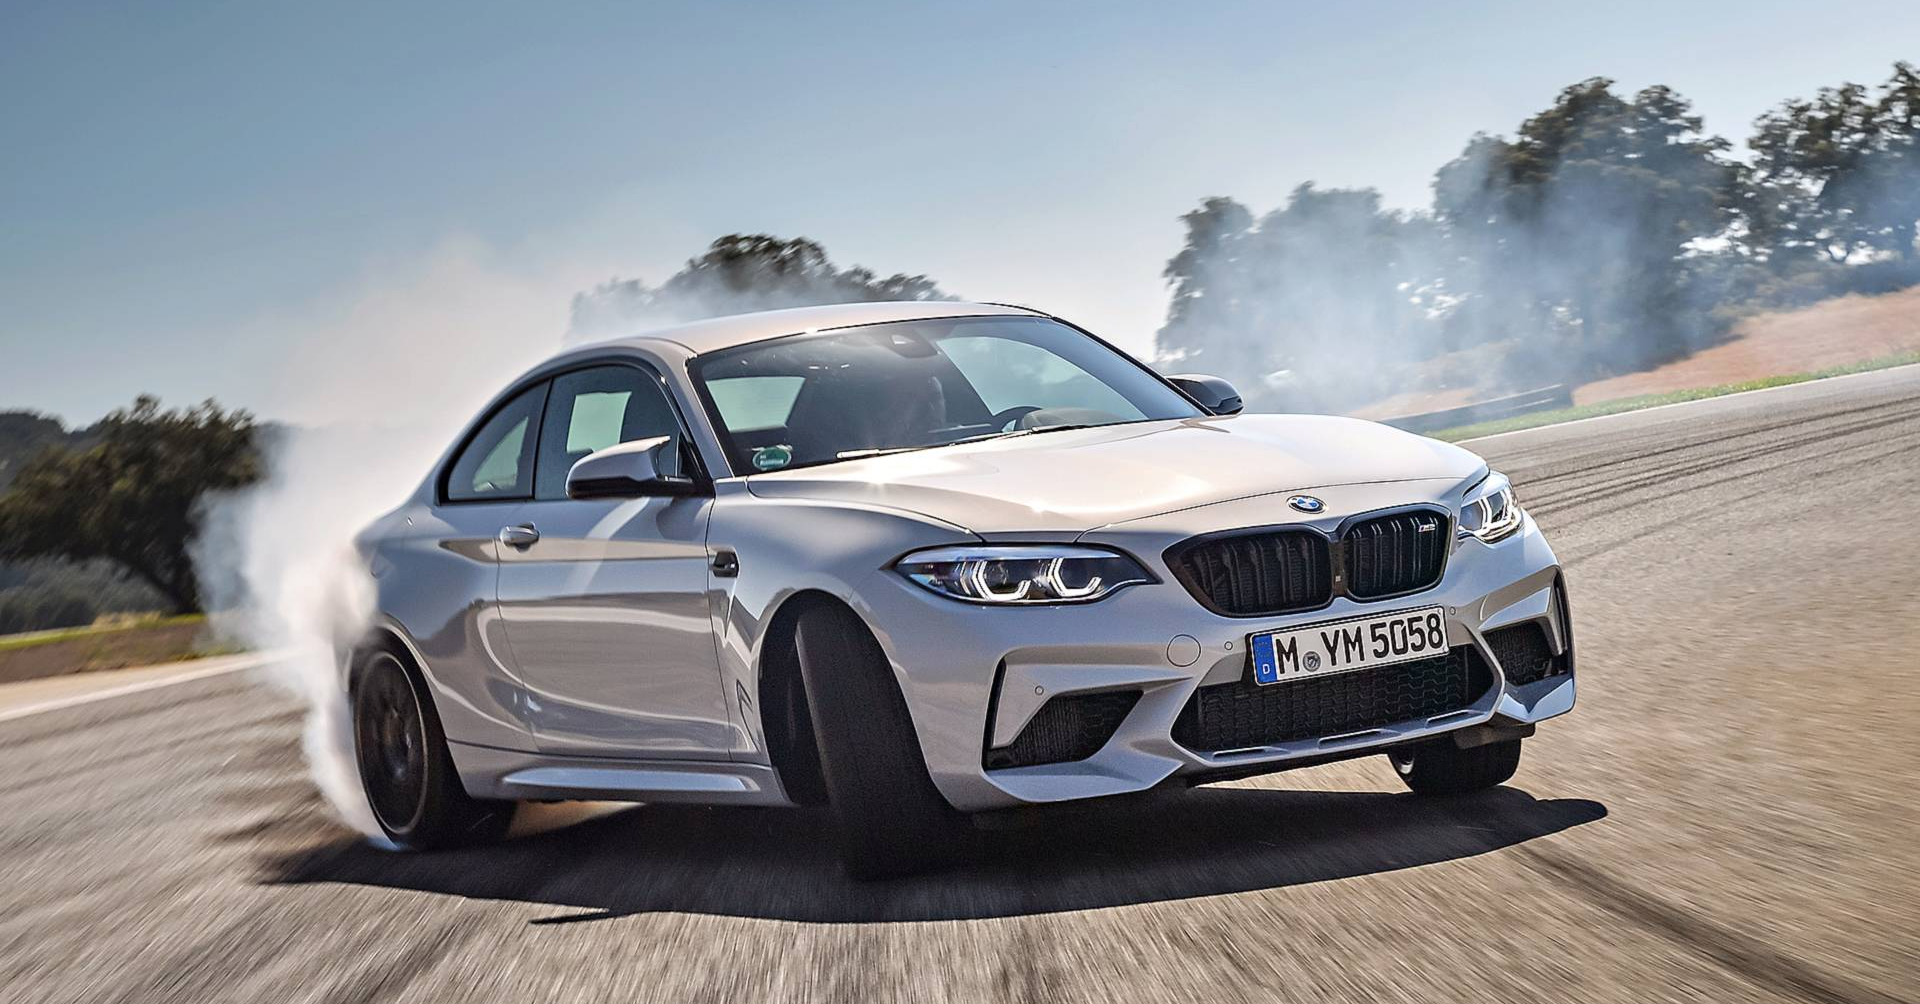 The Quick and Confident Drive of the BMW M2 Competition